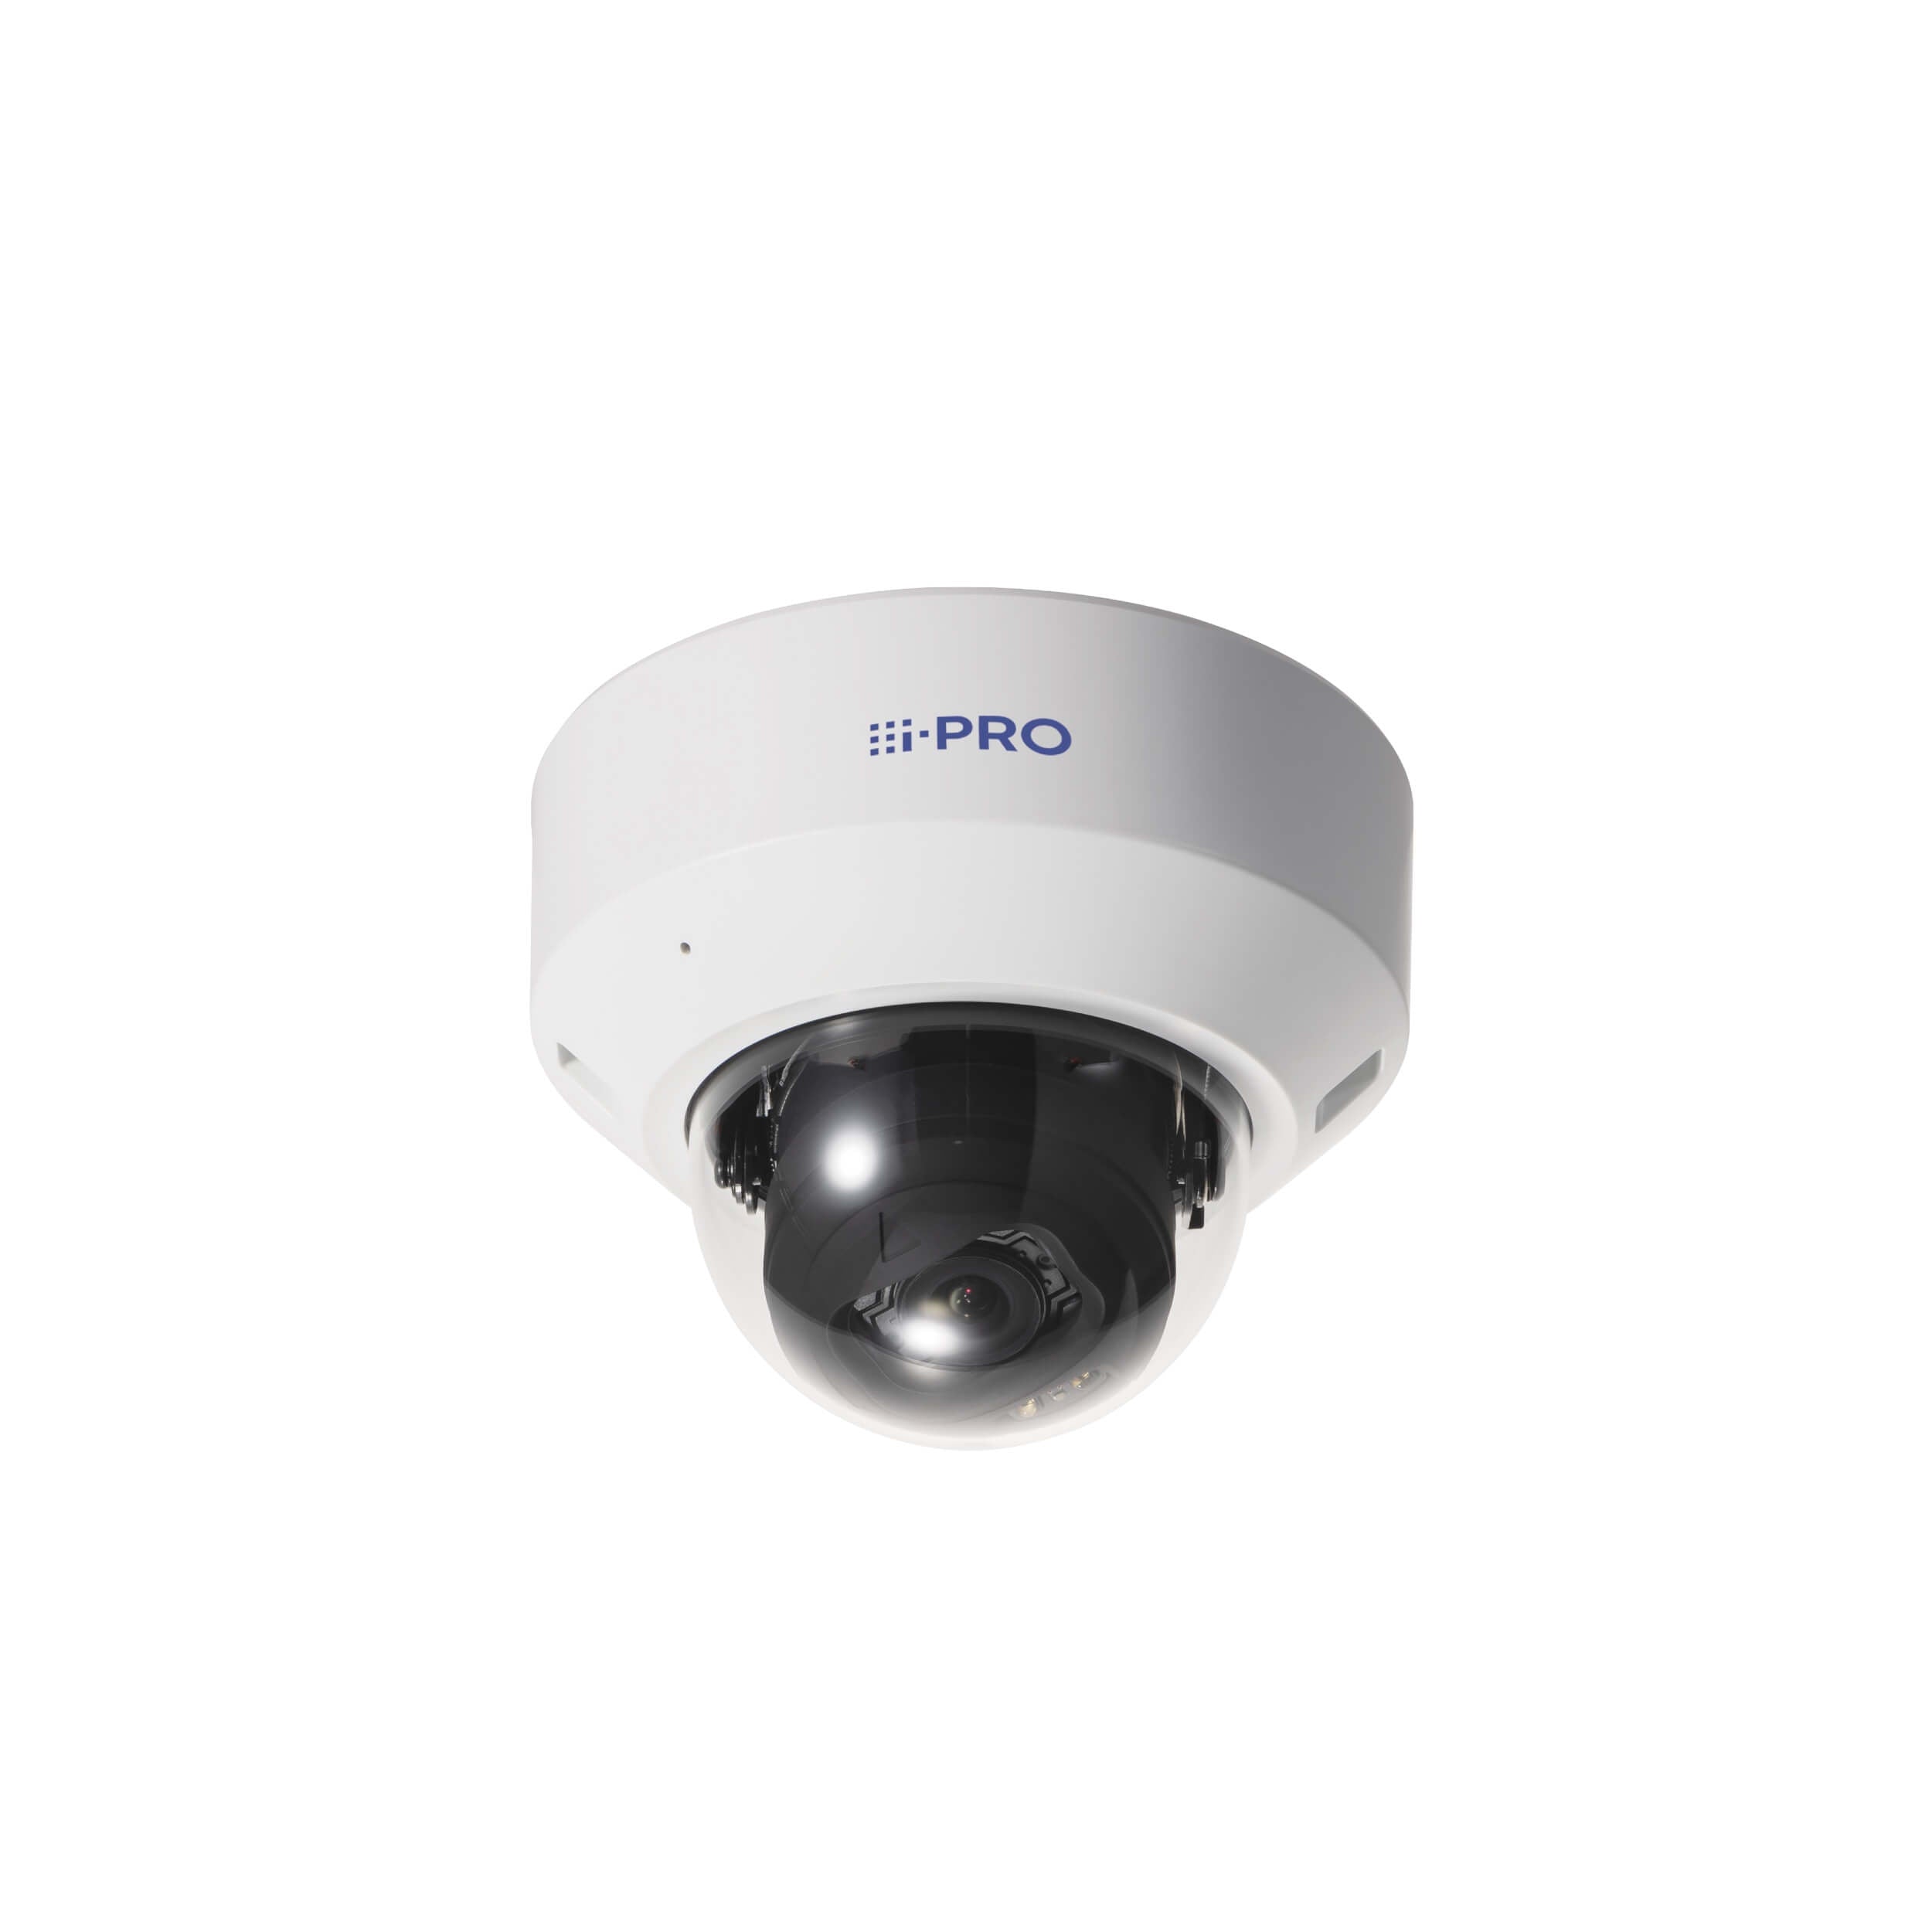 Panasonic WV-S22700-V2L 4K Vandal Resistant Indoor Dome Network Camera with AI Engine with 4.3-8.6mm Lens